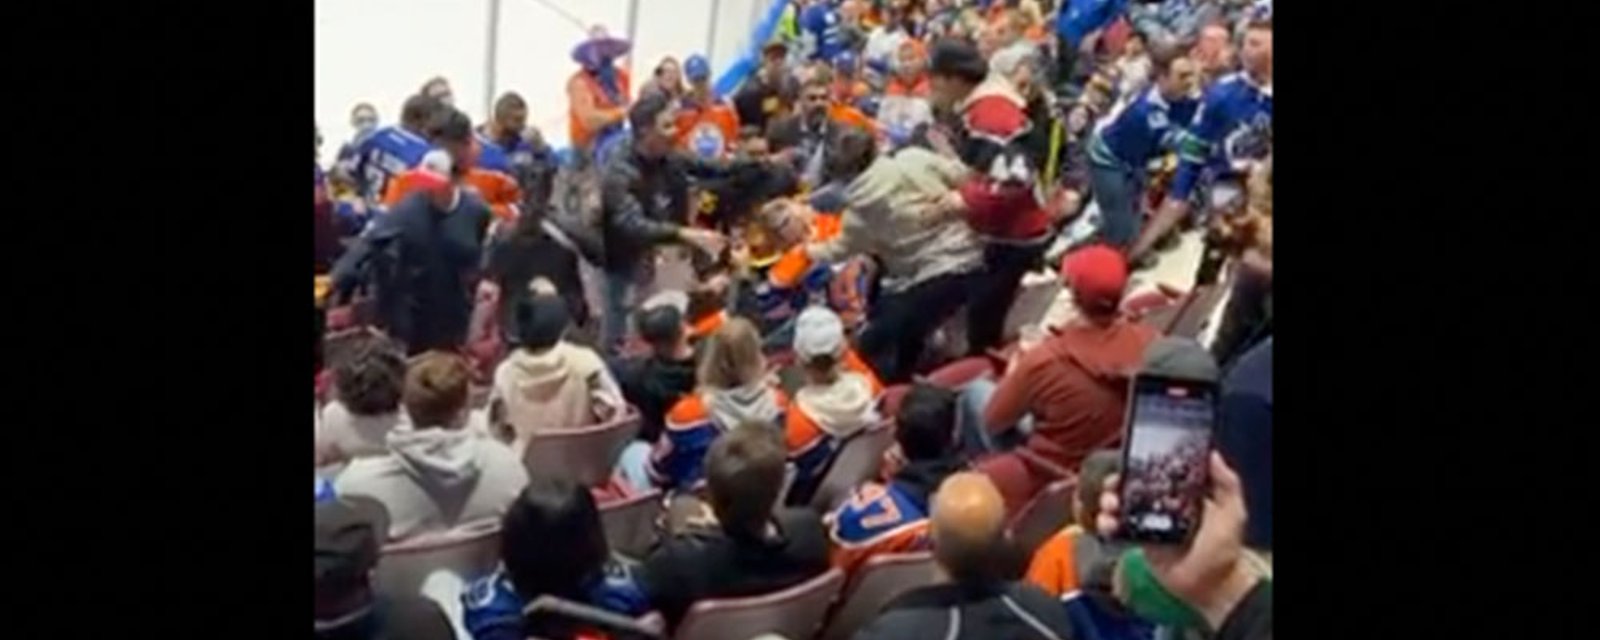 Oilers fan tries to fight Canucks fans in the stands last night